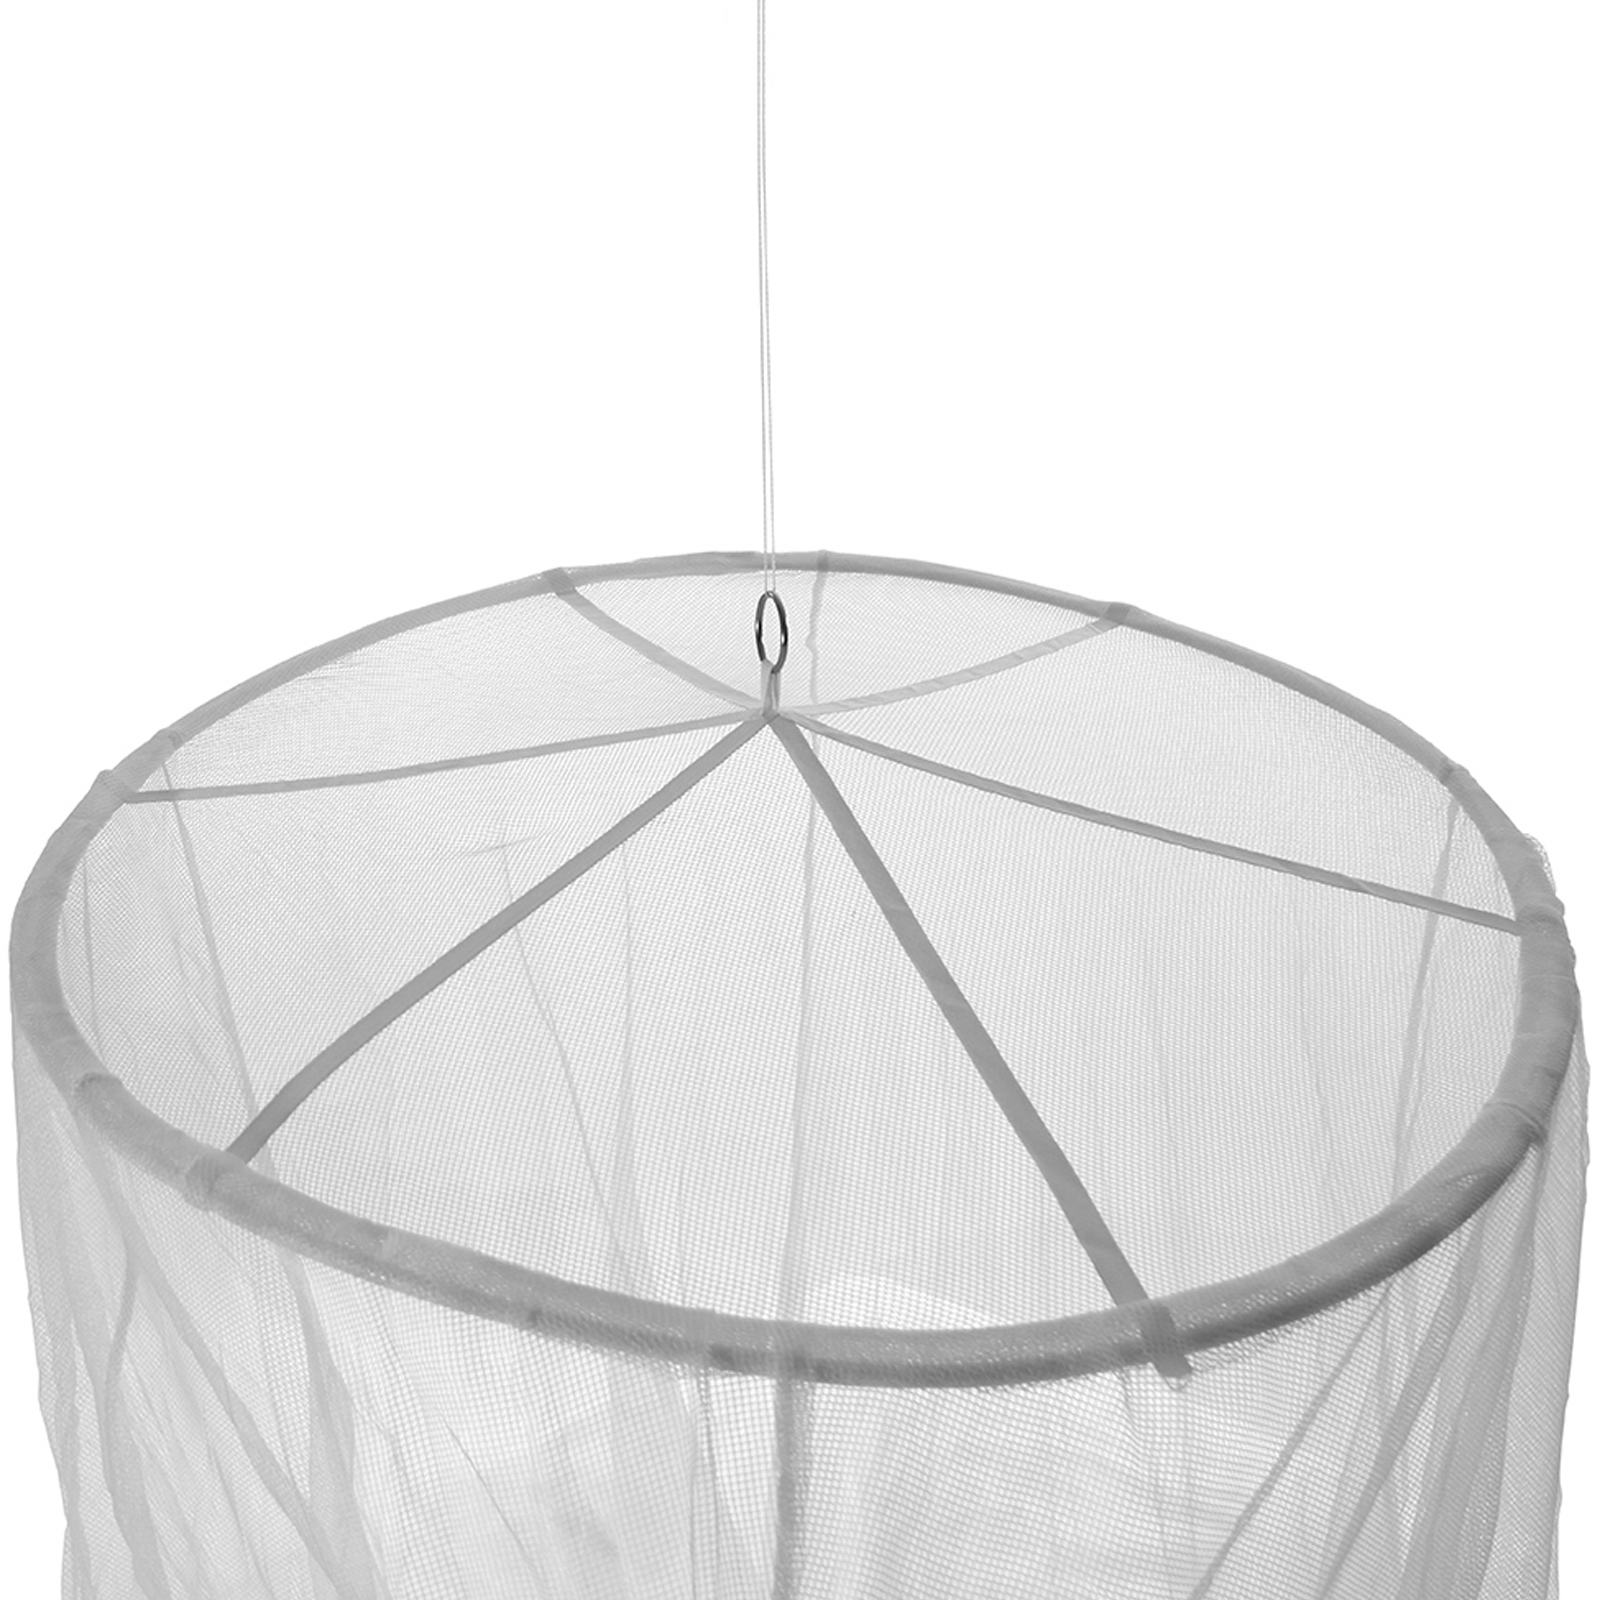 CARE PLUS MOSQUITO NET BELL 1ST